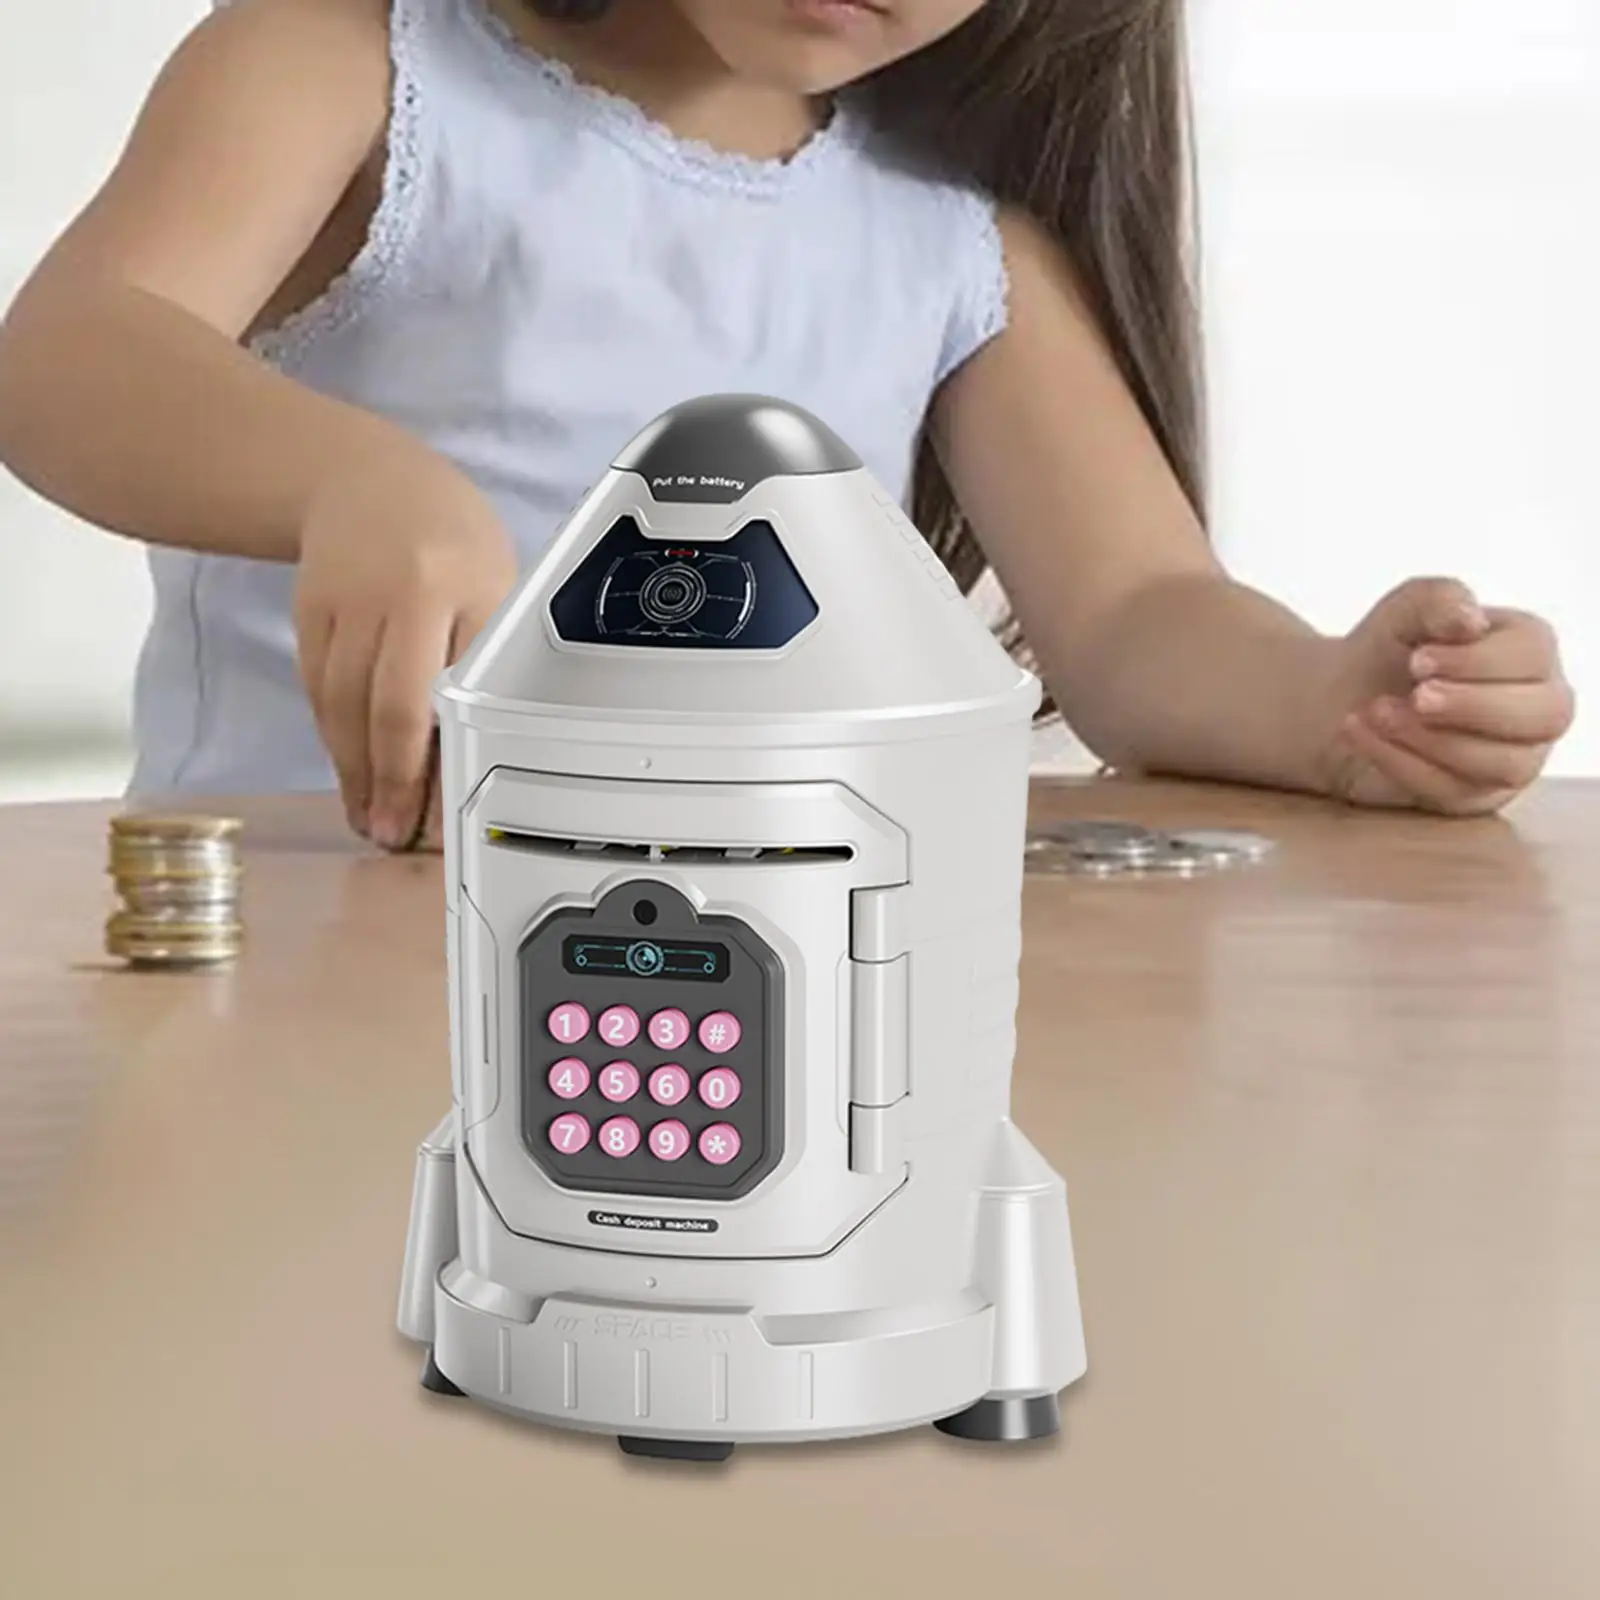 Rocket Piggy Bank Birthday Gifts Early Learning Money Bank Electronic Atm Savings Machine for Age 3-8 Years Kids Boys Girls